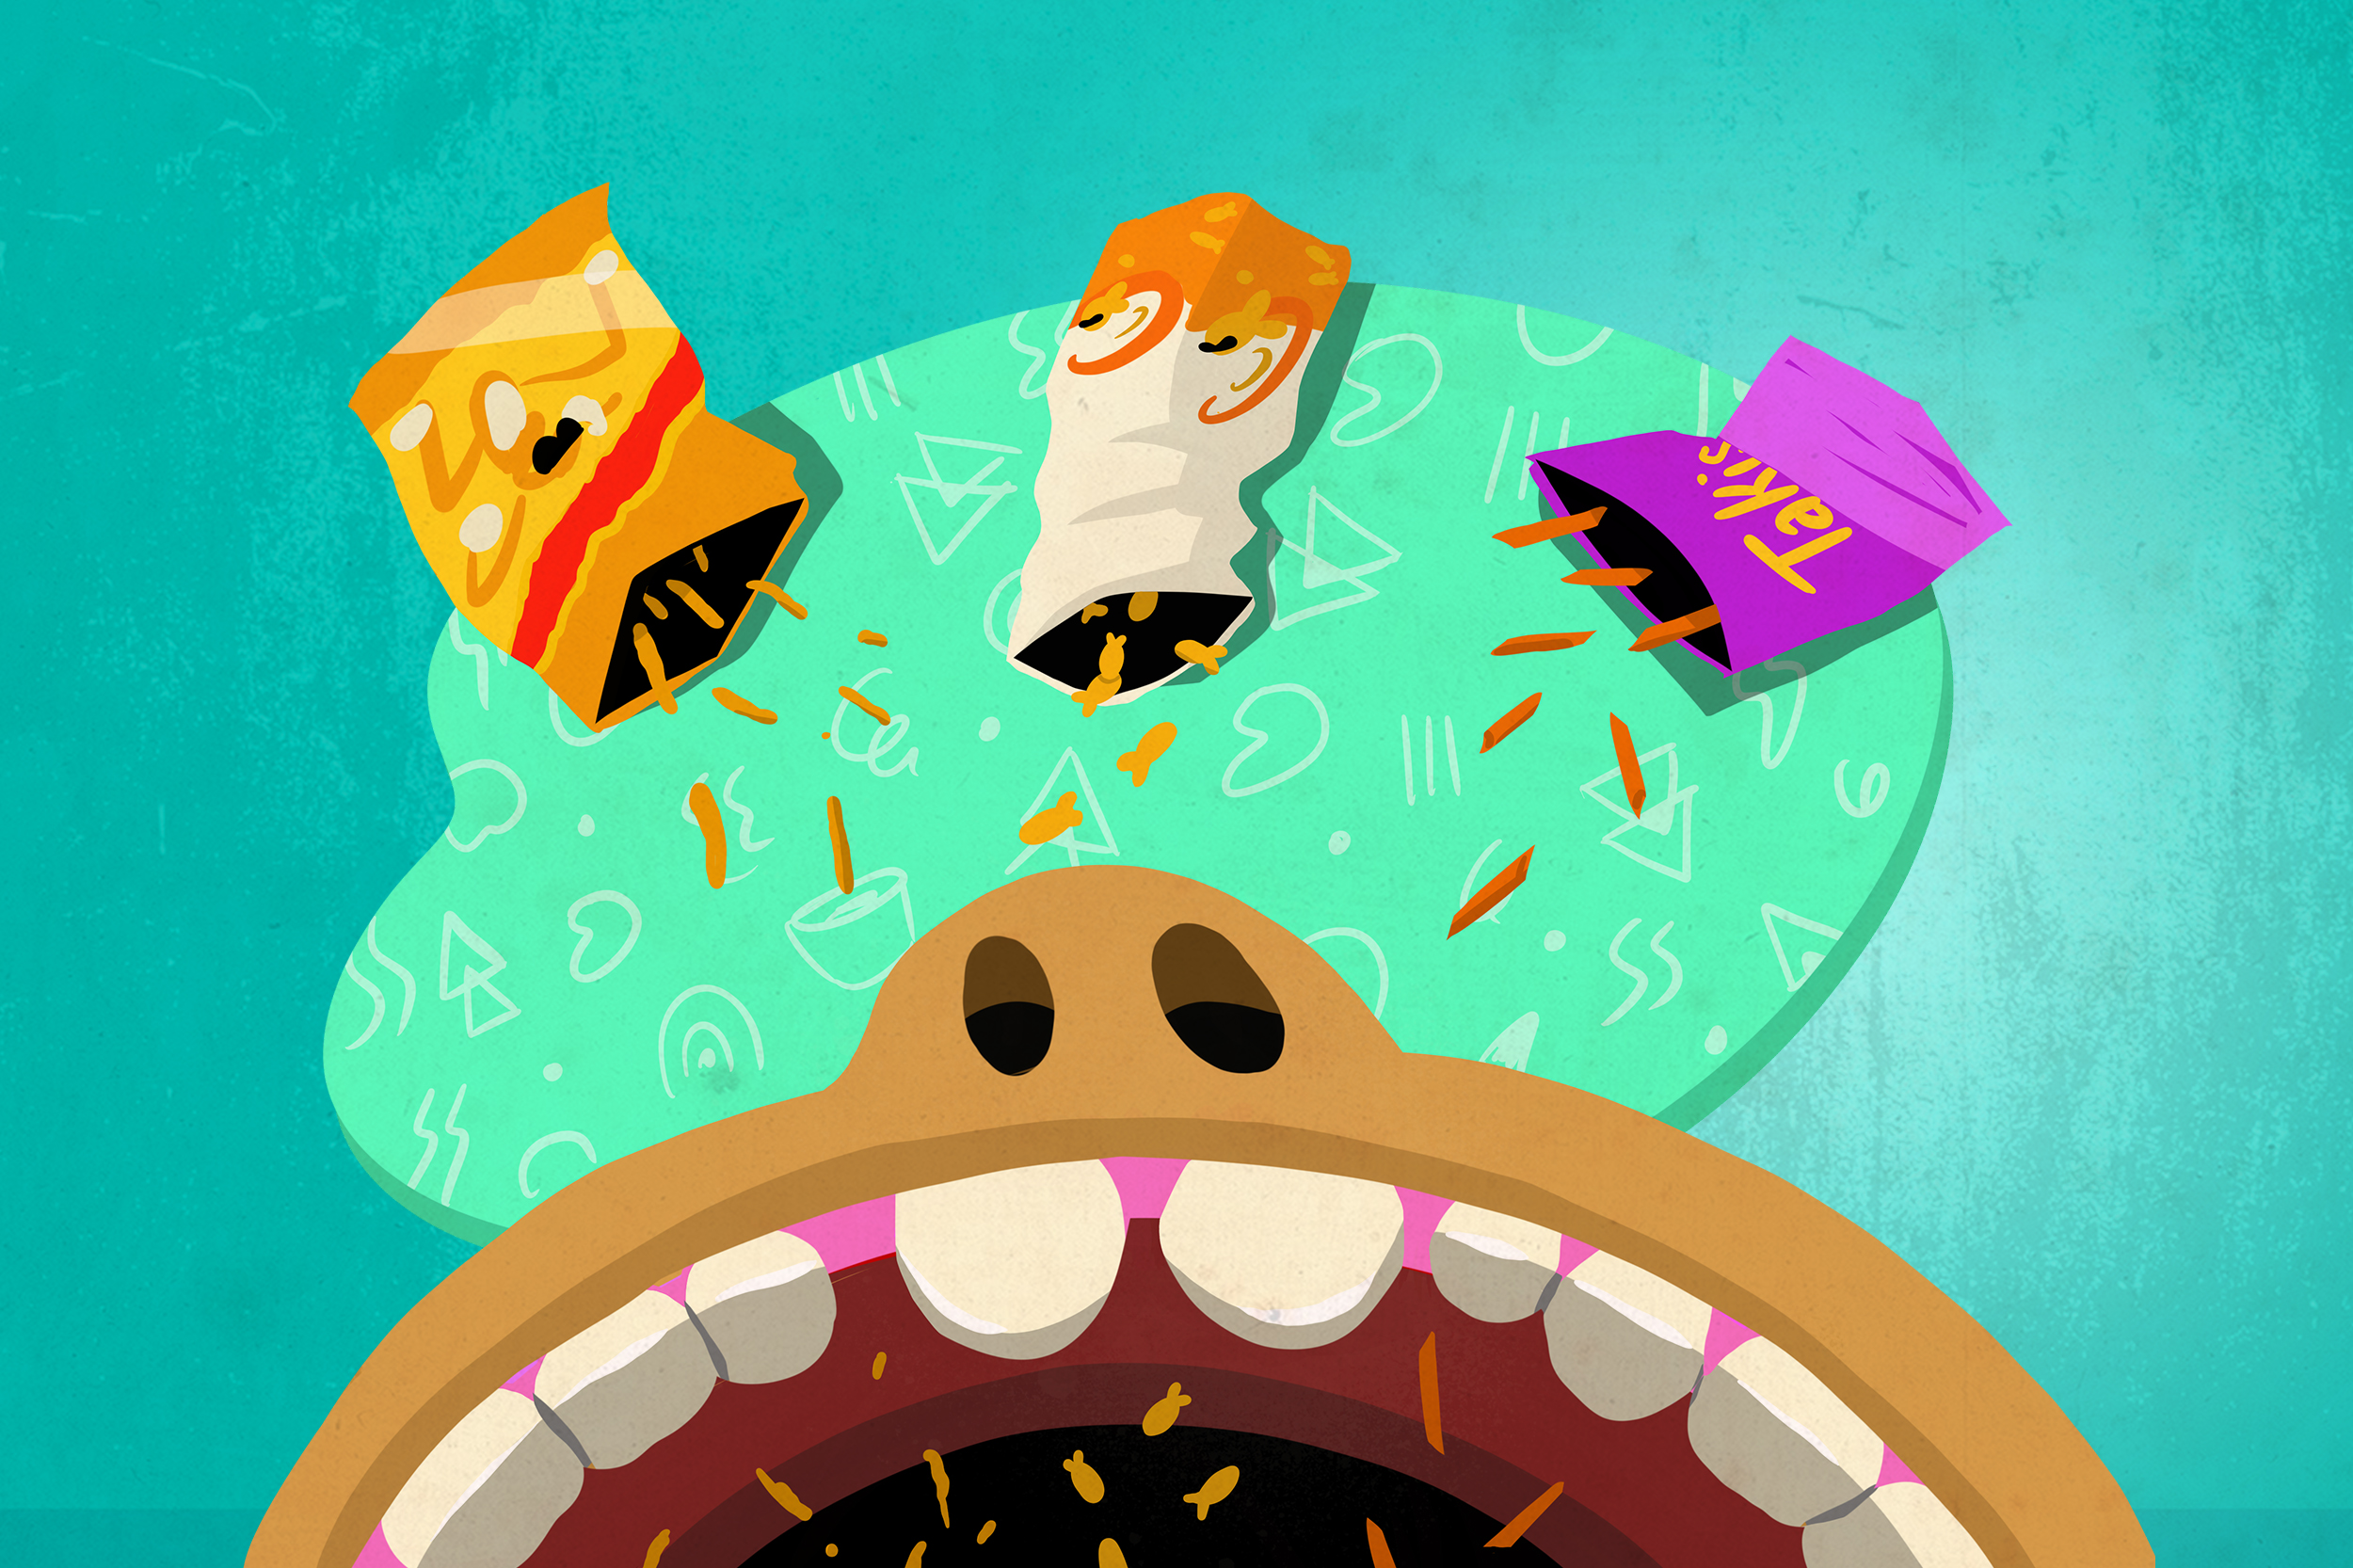 Illustration of three bags of snacks (Takis, Cheetos, and Goldfish) falling into a child’s open mouth.